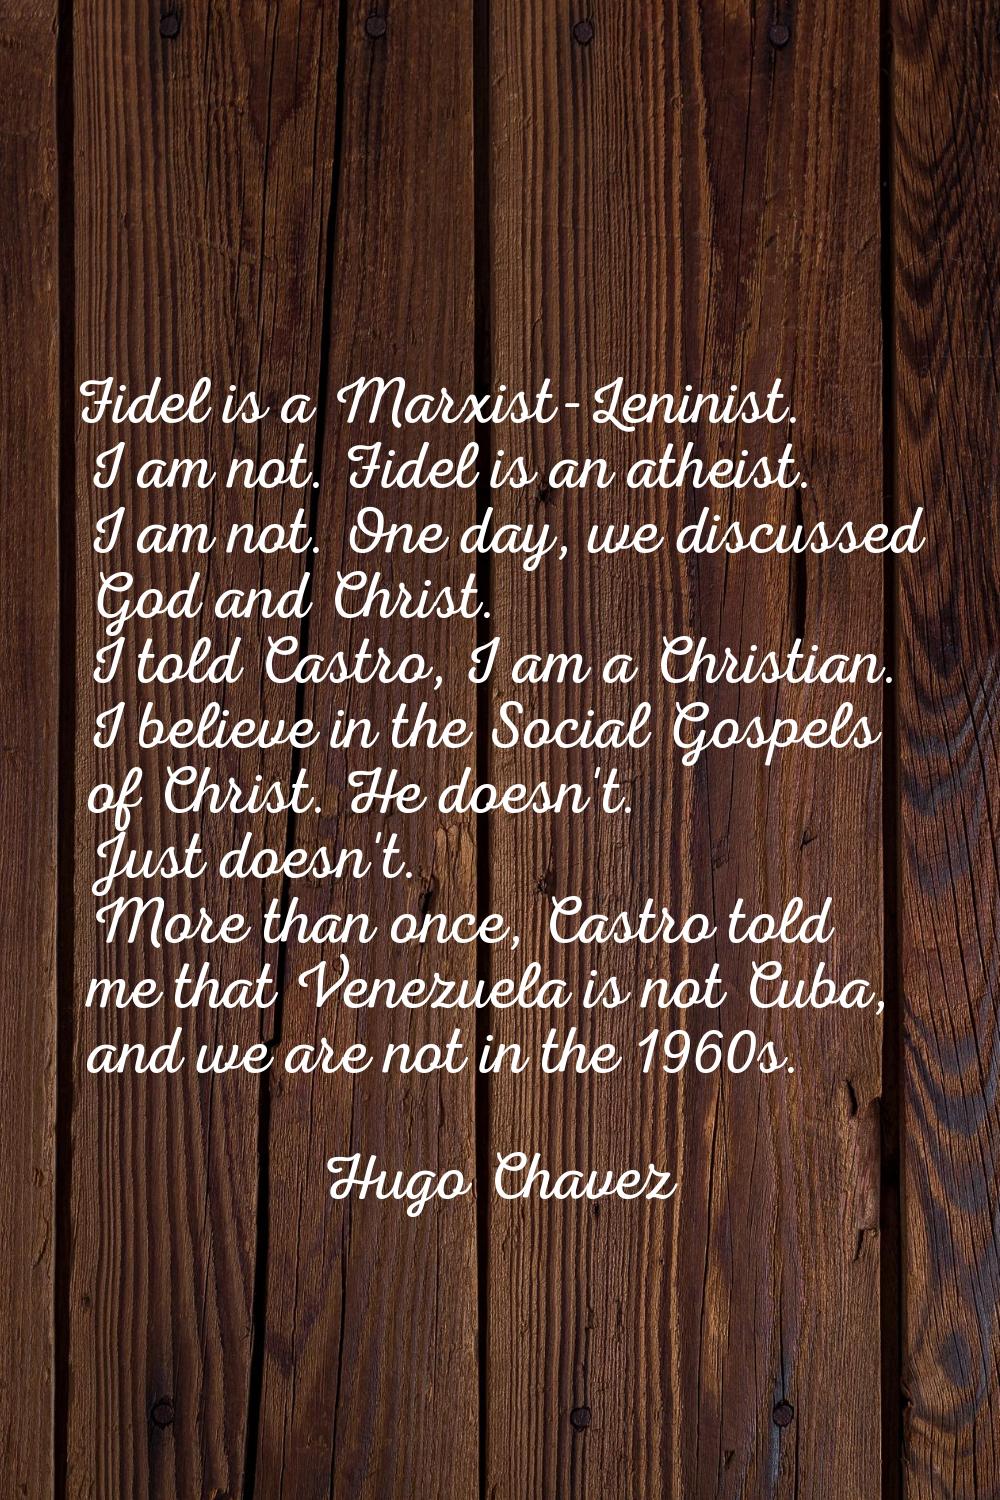 Fidel is a Marxist-Leninist. I am not. Fidel is an atheist. I am not. One day, we discussed God and